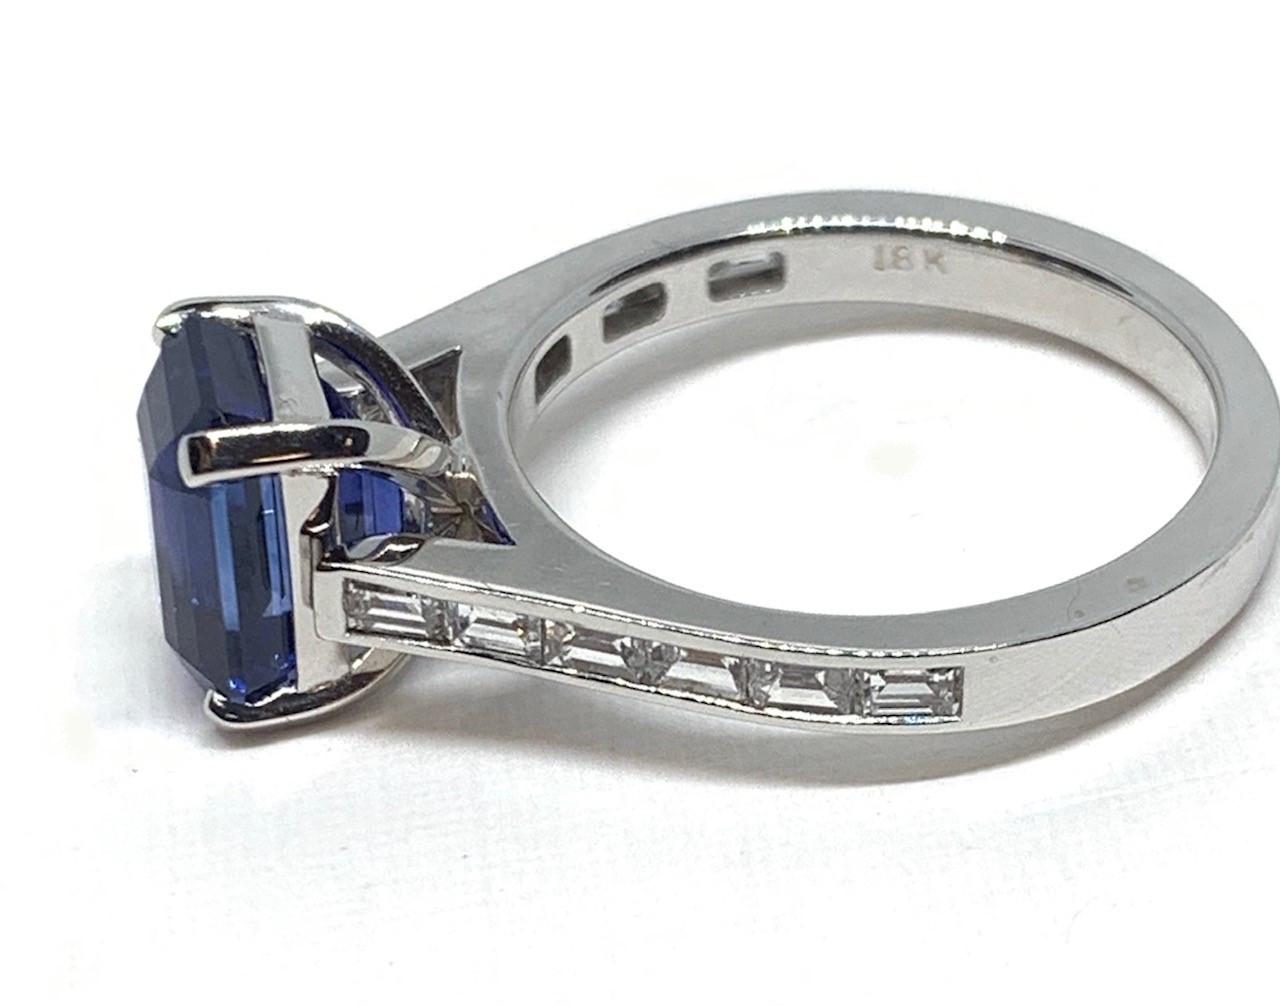 3.94 ct. Blue Sapphire & Channel Set Diamond 18k White Gold Engagement Band Ring 2